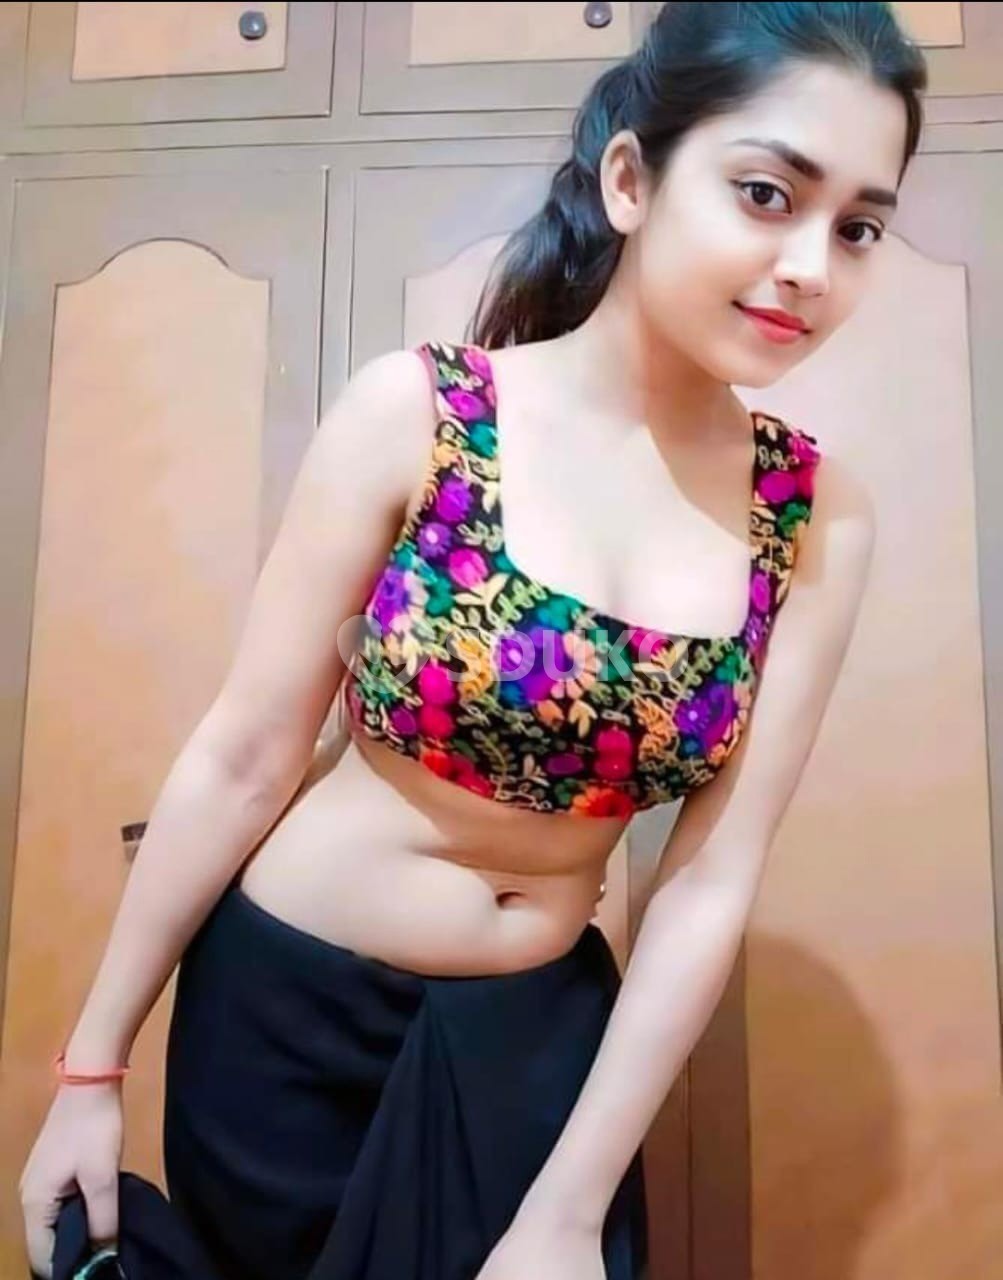 ANJLI 82220---58413 ZIRAKPUR TO HAND PAYMENT CALL ME ANYTIME FOR REAL AND GENUINE SERVICE WITHOUT ANY ADVANCE